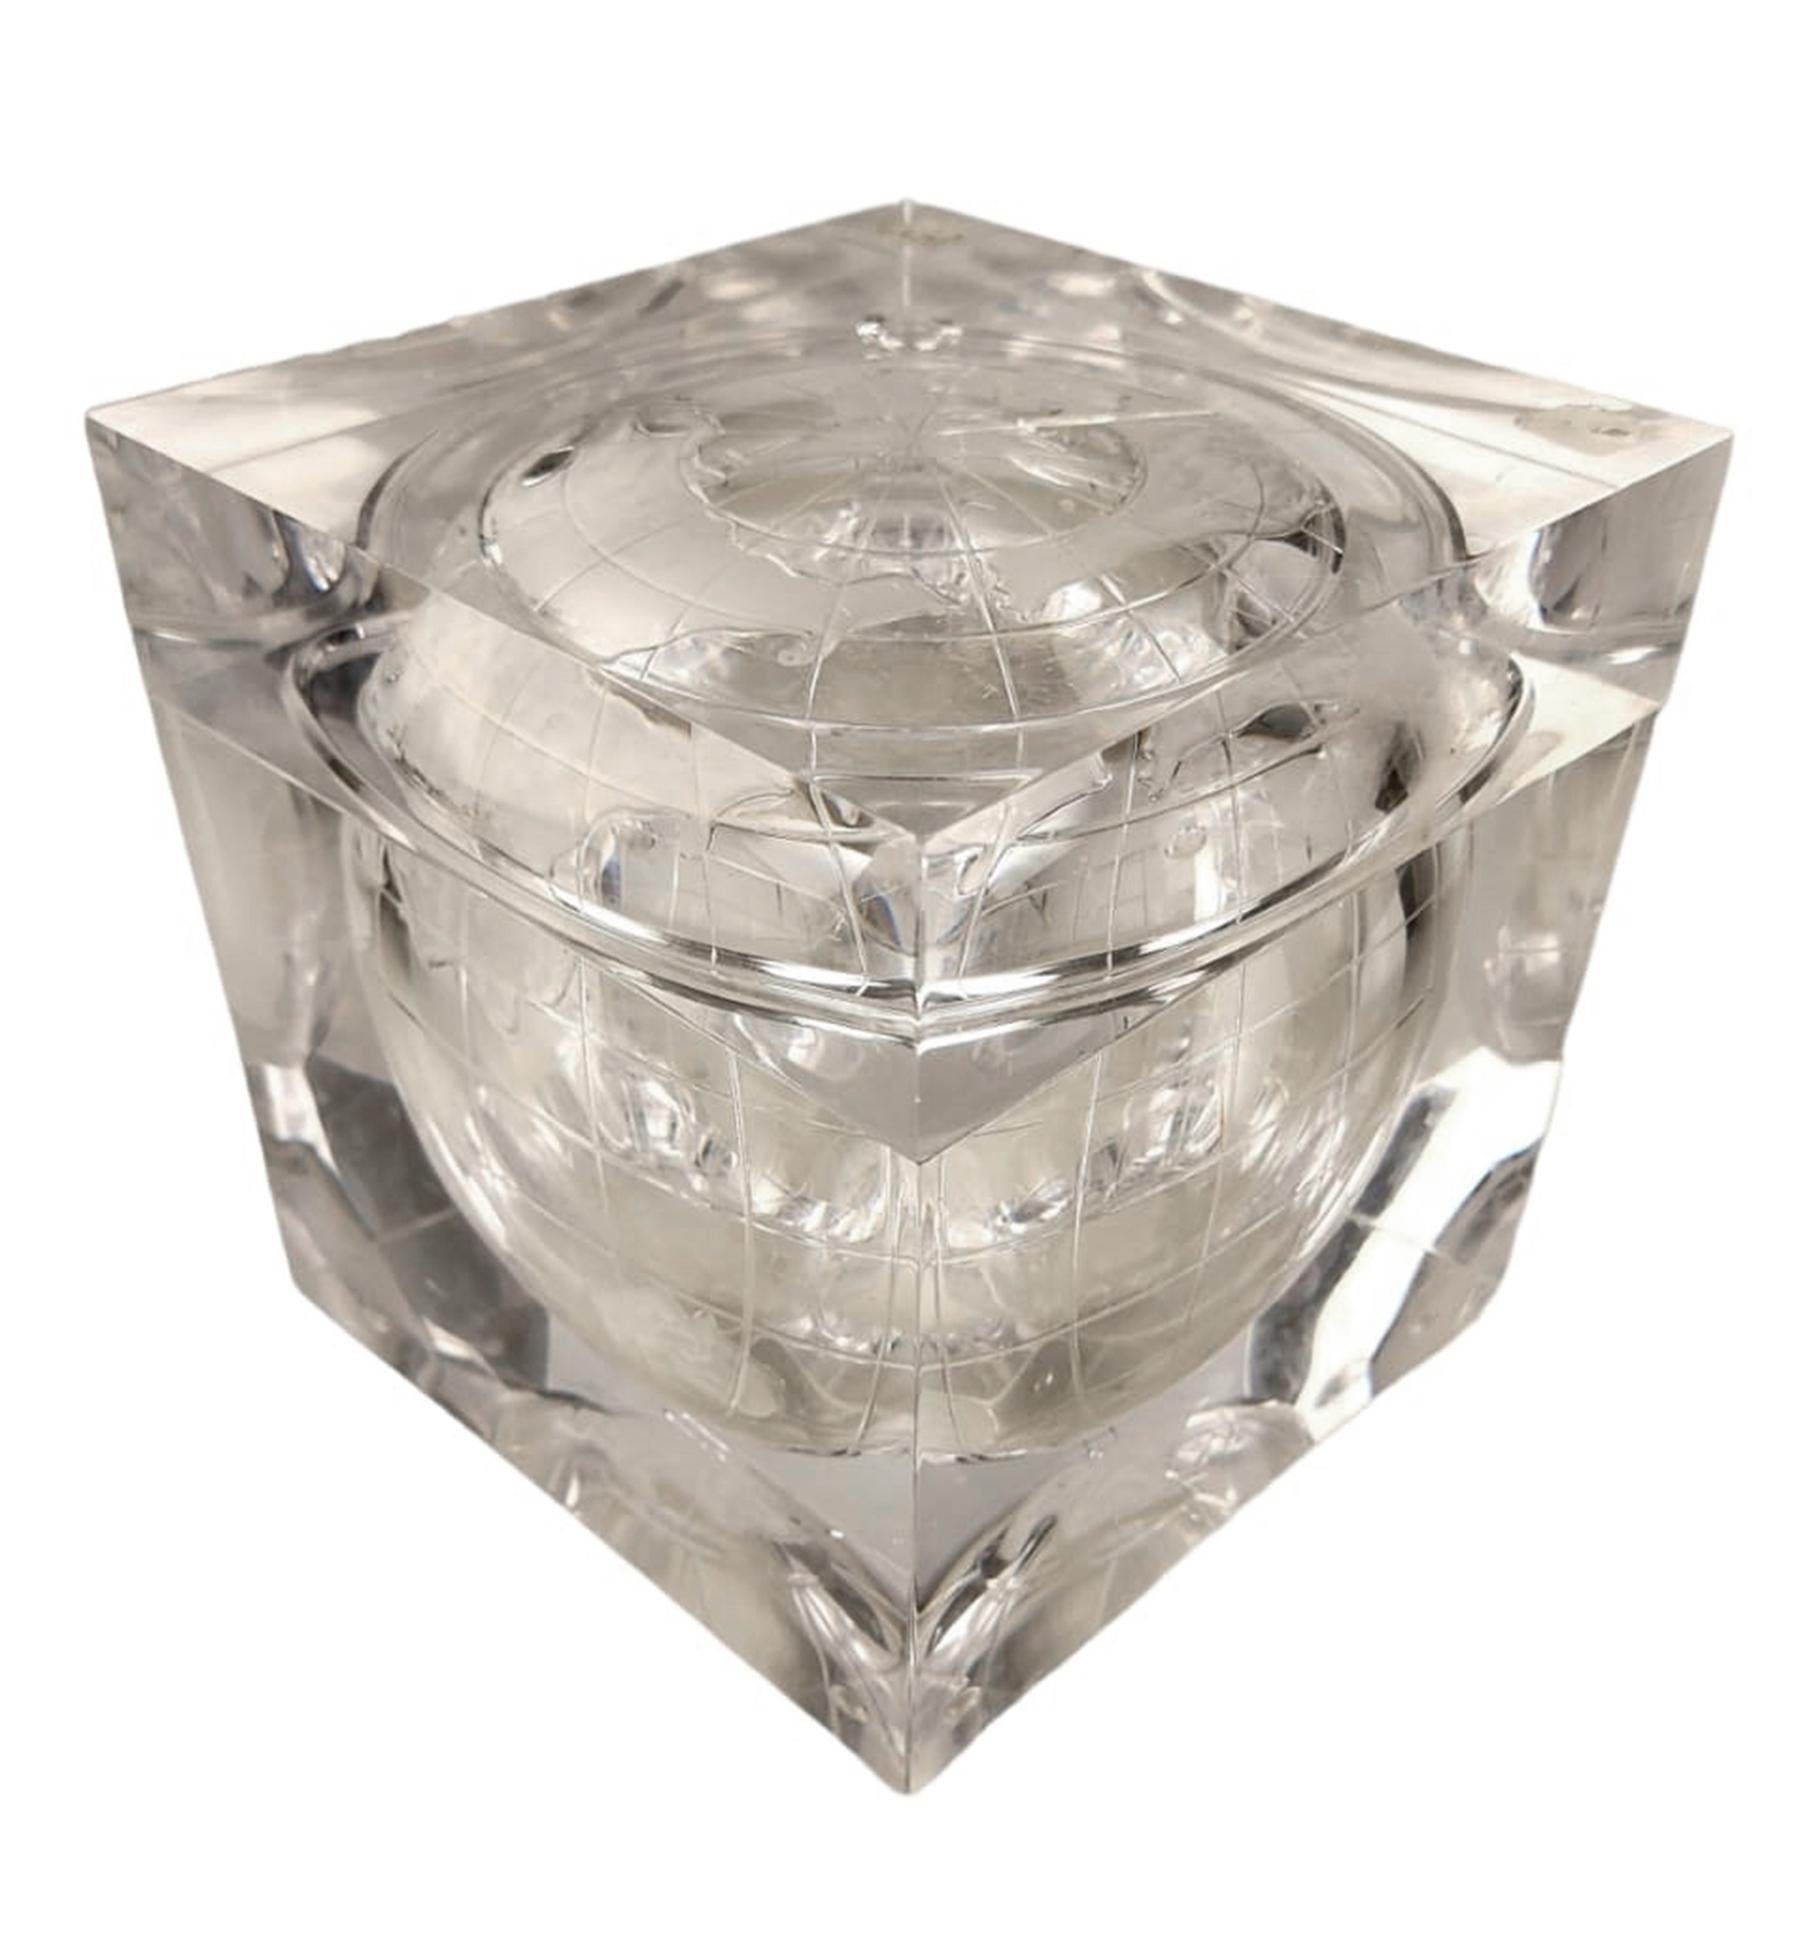 1960s Space Age translucent acrylic/synthetic/plastic world globe cubic ice bucket by Alessandro Albrizzi, Italy

By: Alessandro Albrizzi
Material: acrylic, lucite, plastic, synthetic
Technique: cast, molded, polished, etched, carved
Dimensions: 7